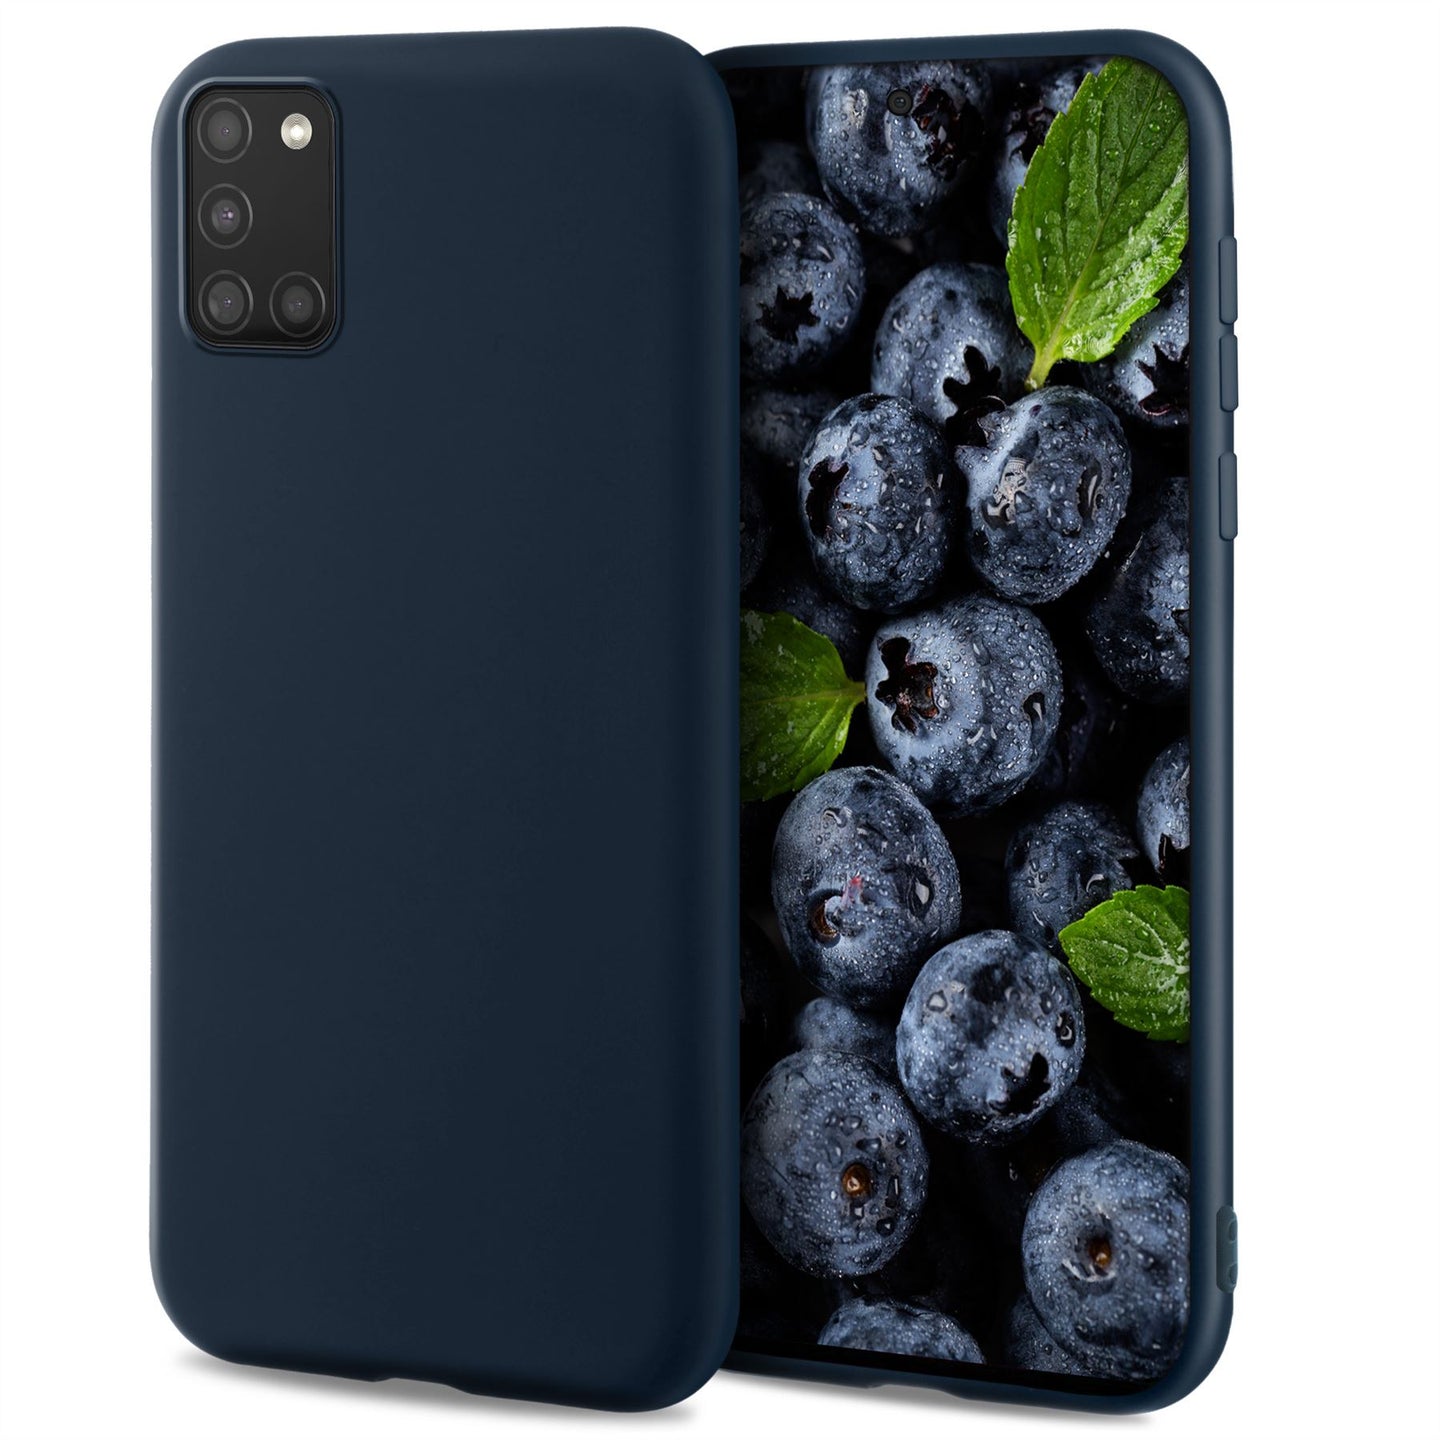 Moozy Lifestyle. Designed for Samsung A51 Case, Midnight Blue - Liquid Silicone Cover with Matte Finish and Soft Microfiber Lining